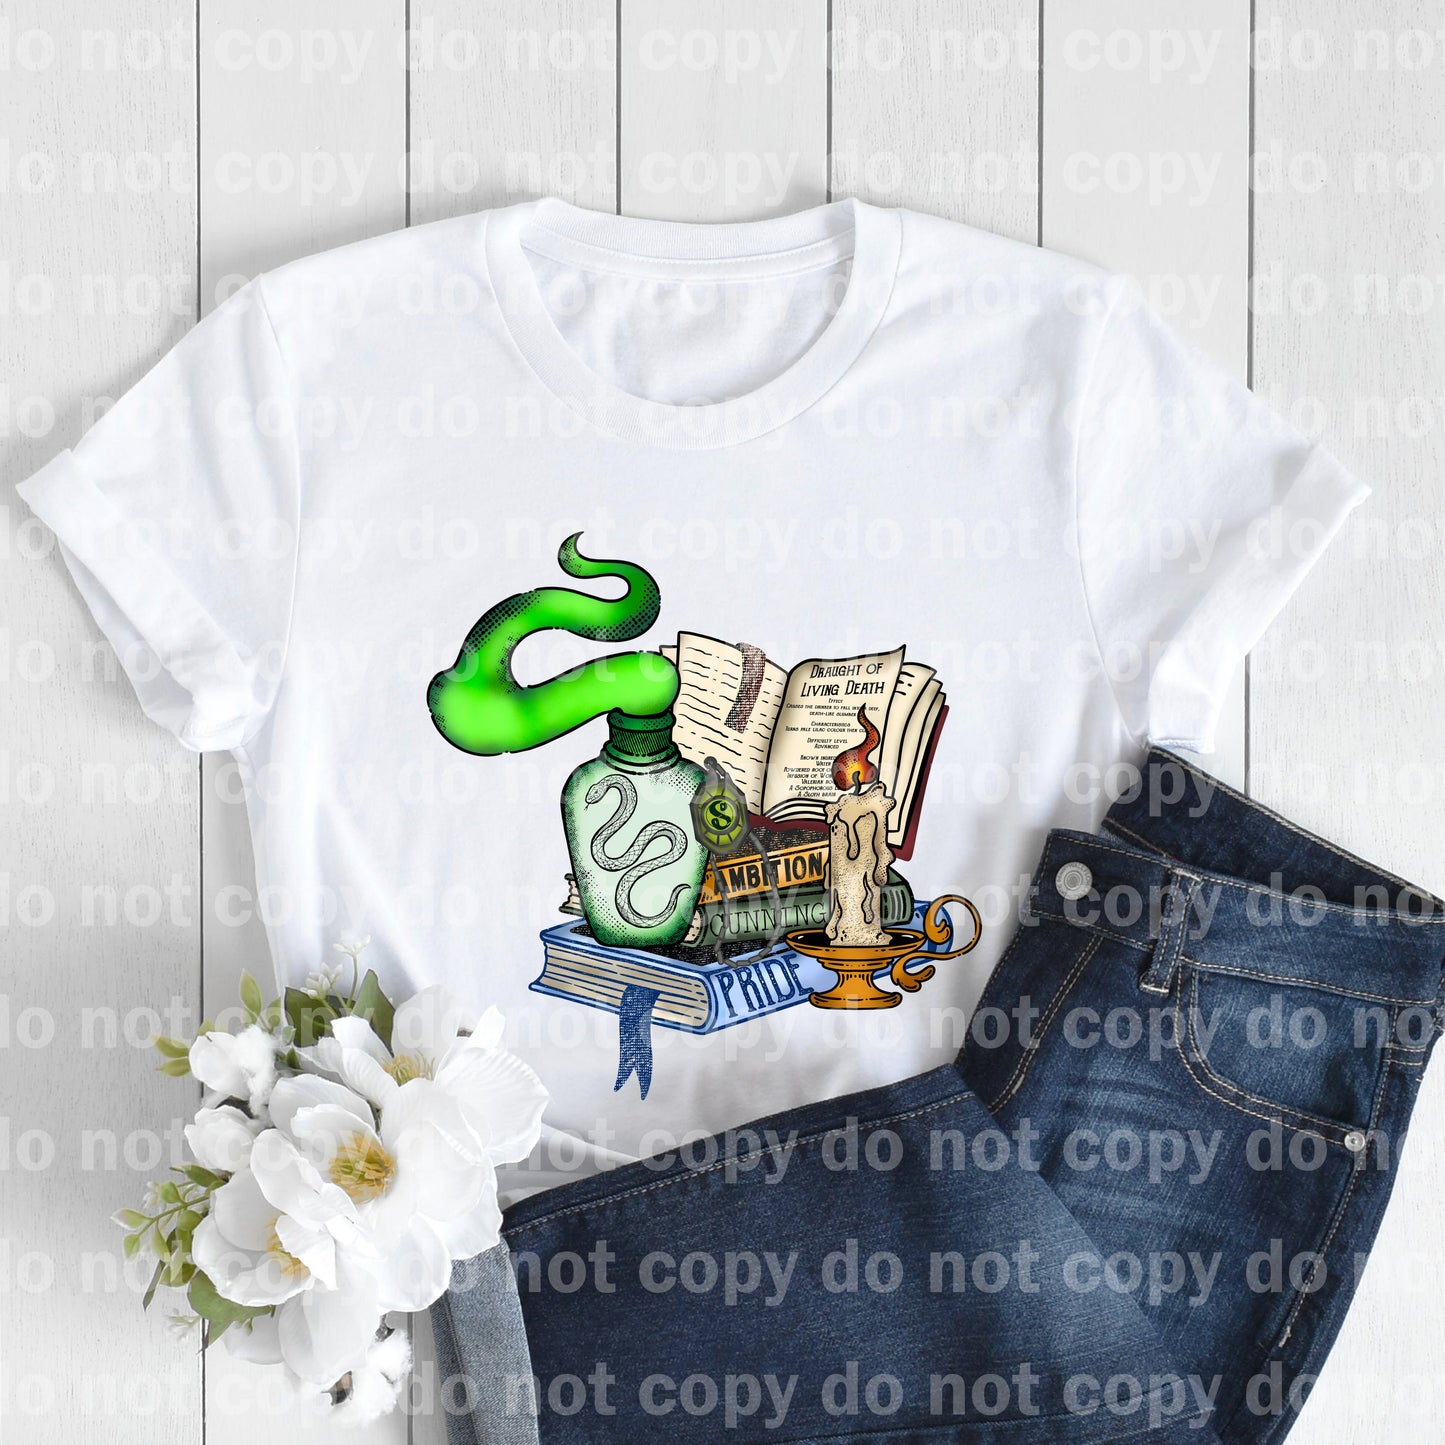 Serpent No Label Ambition Cunning Pride Full Color/One Color Dream Print or Sublimation Print